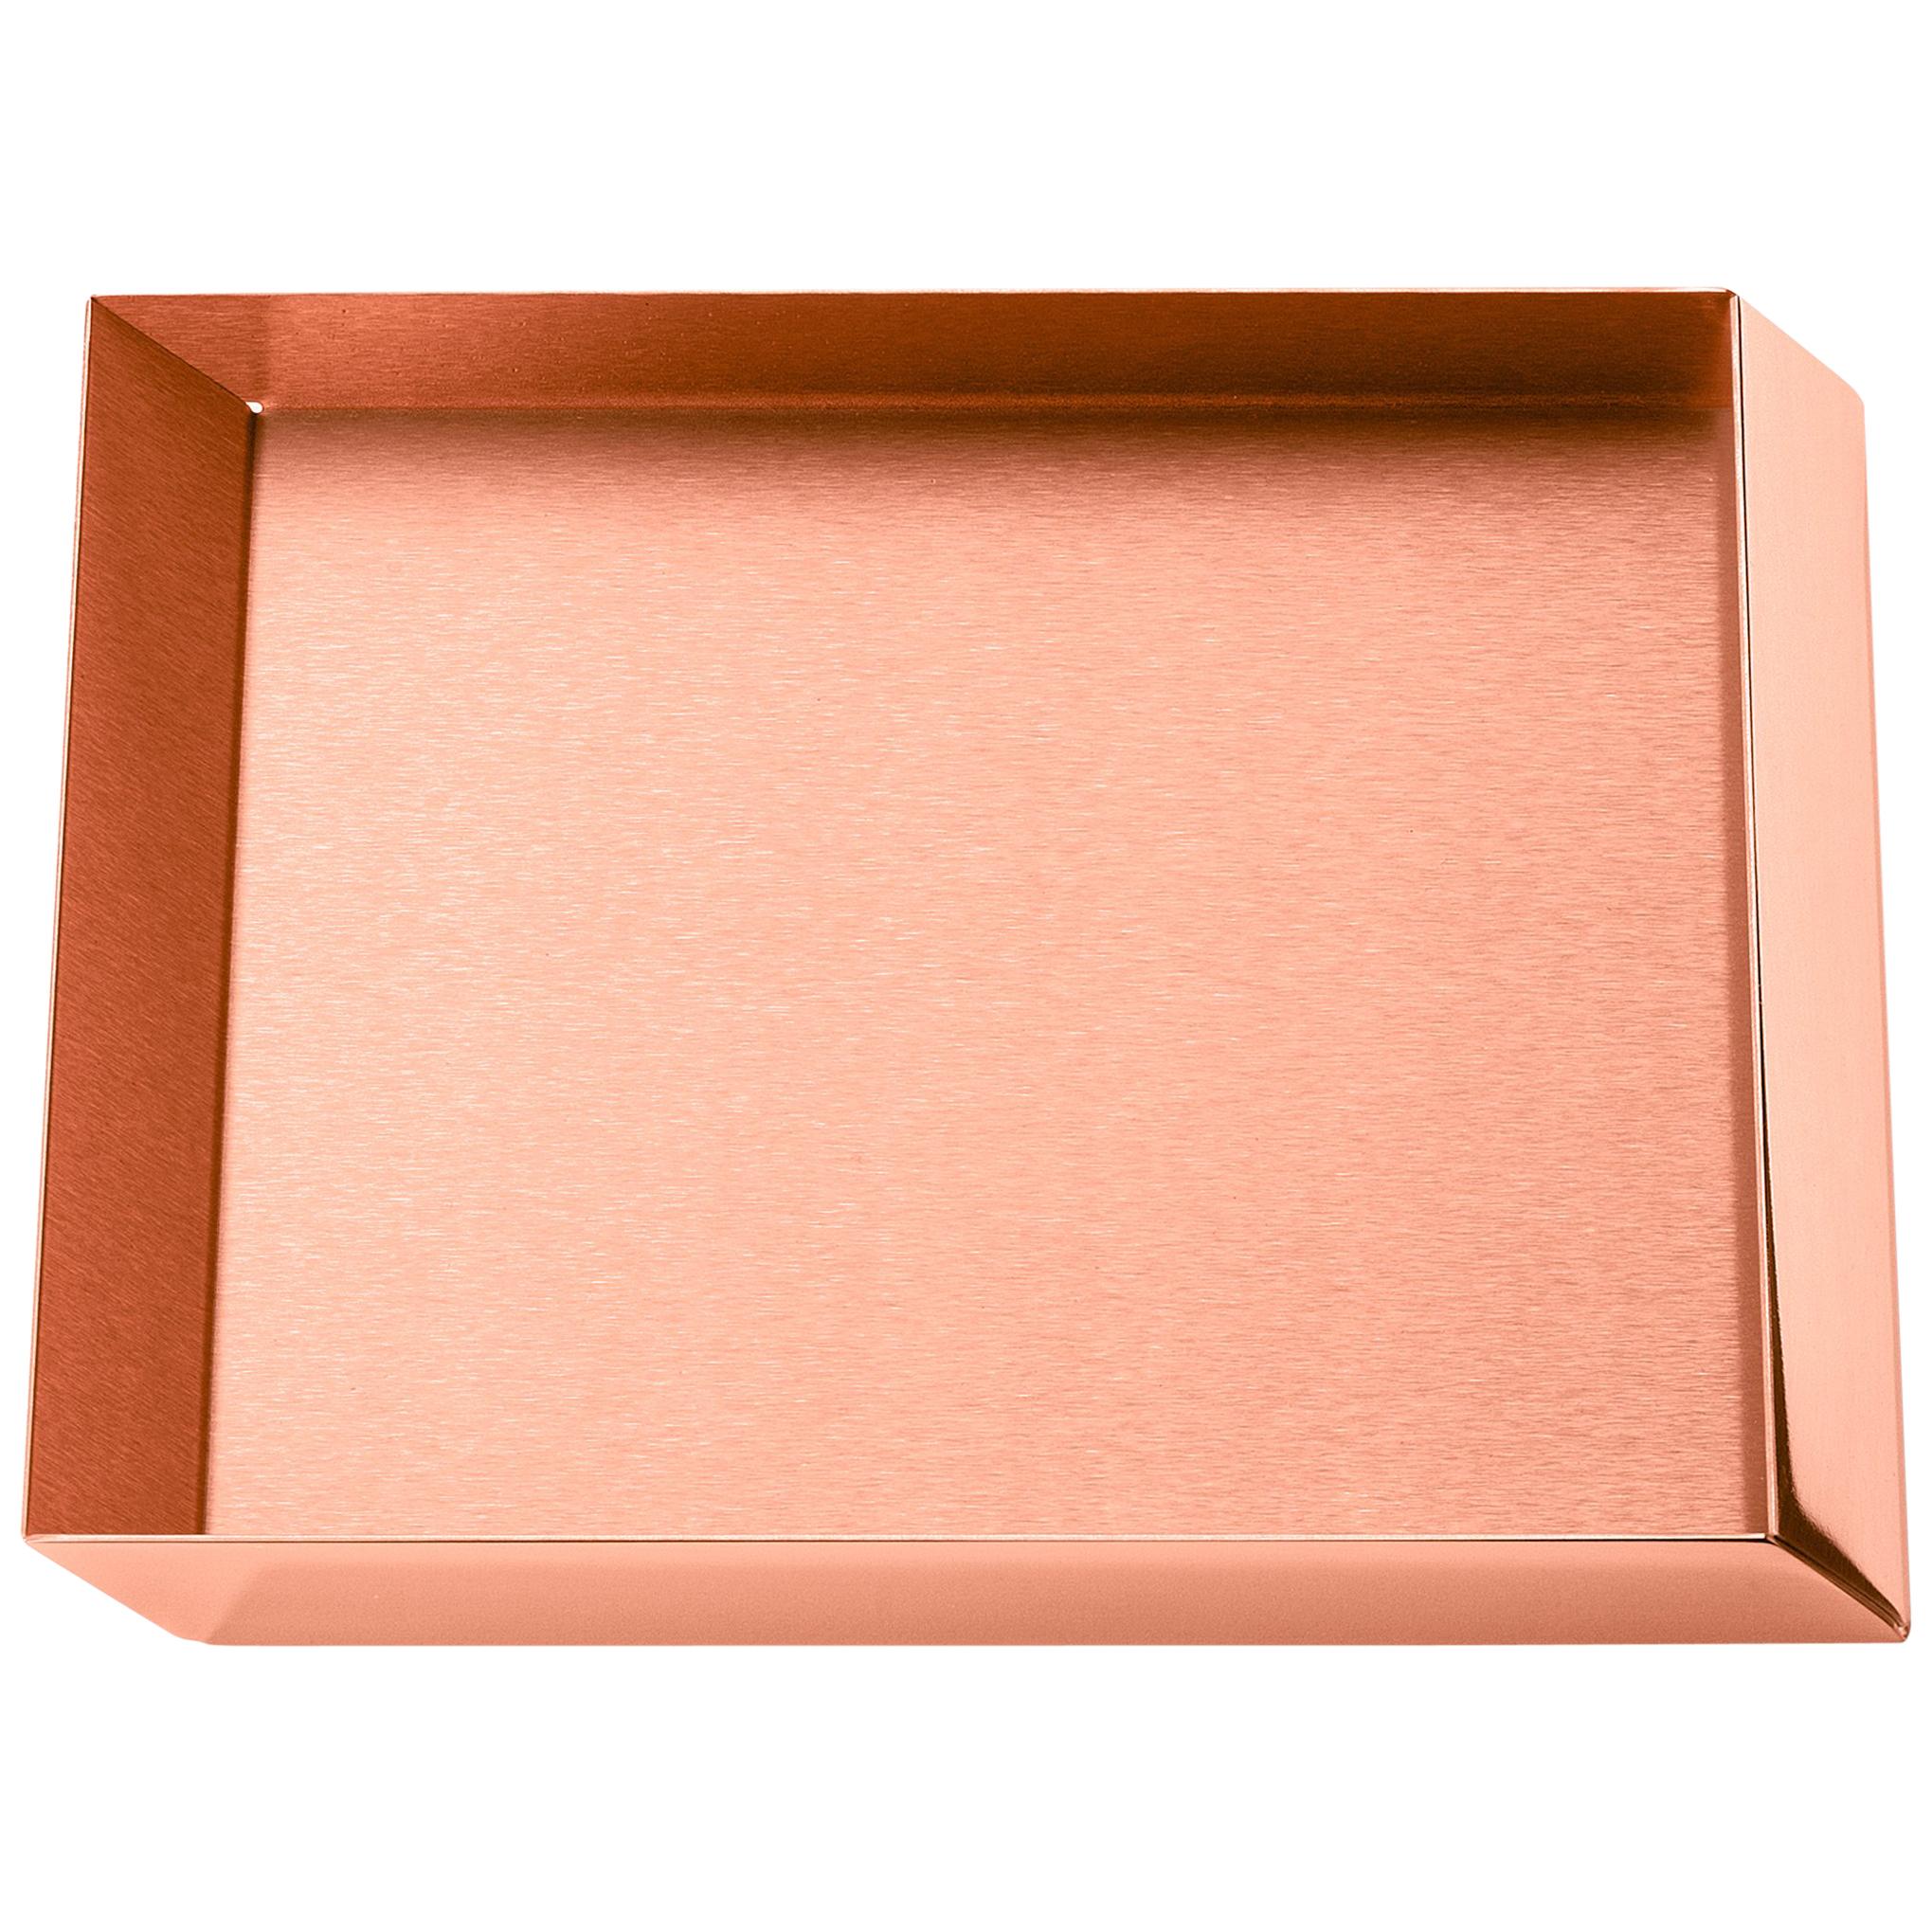 Ghidini 1961 Axonometry Small Squared Tray in Copper by Elisa Giovanni